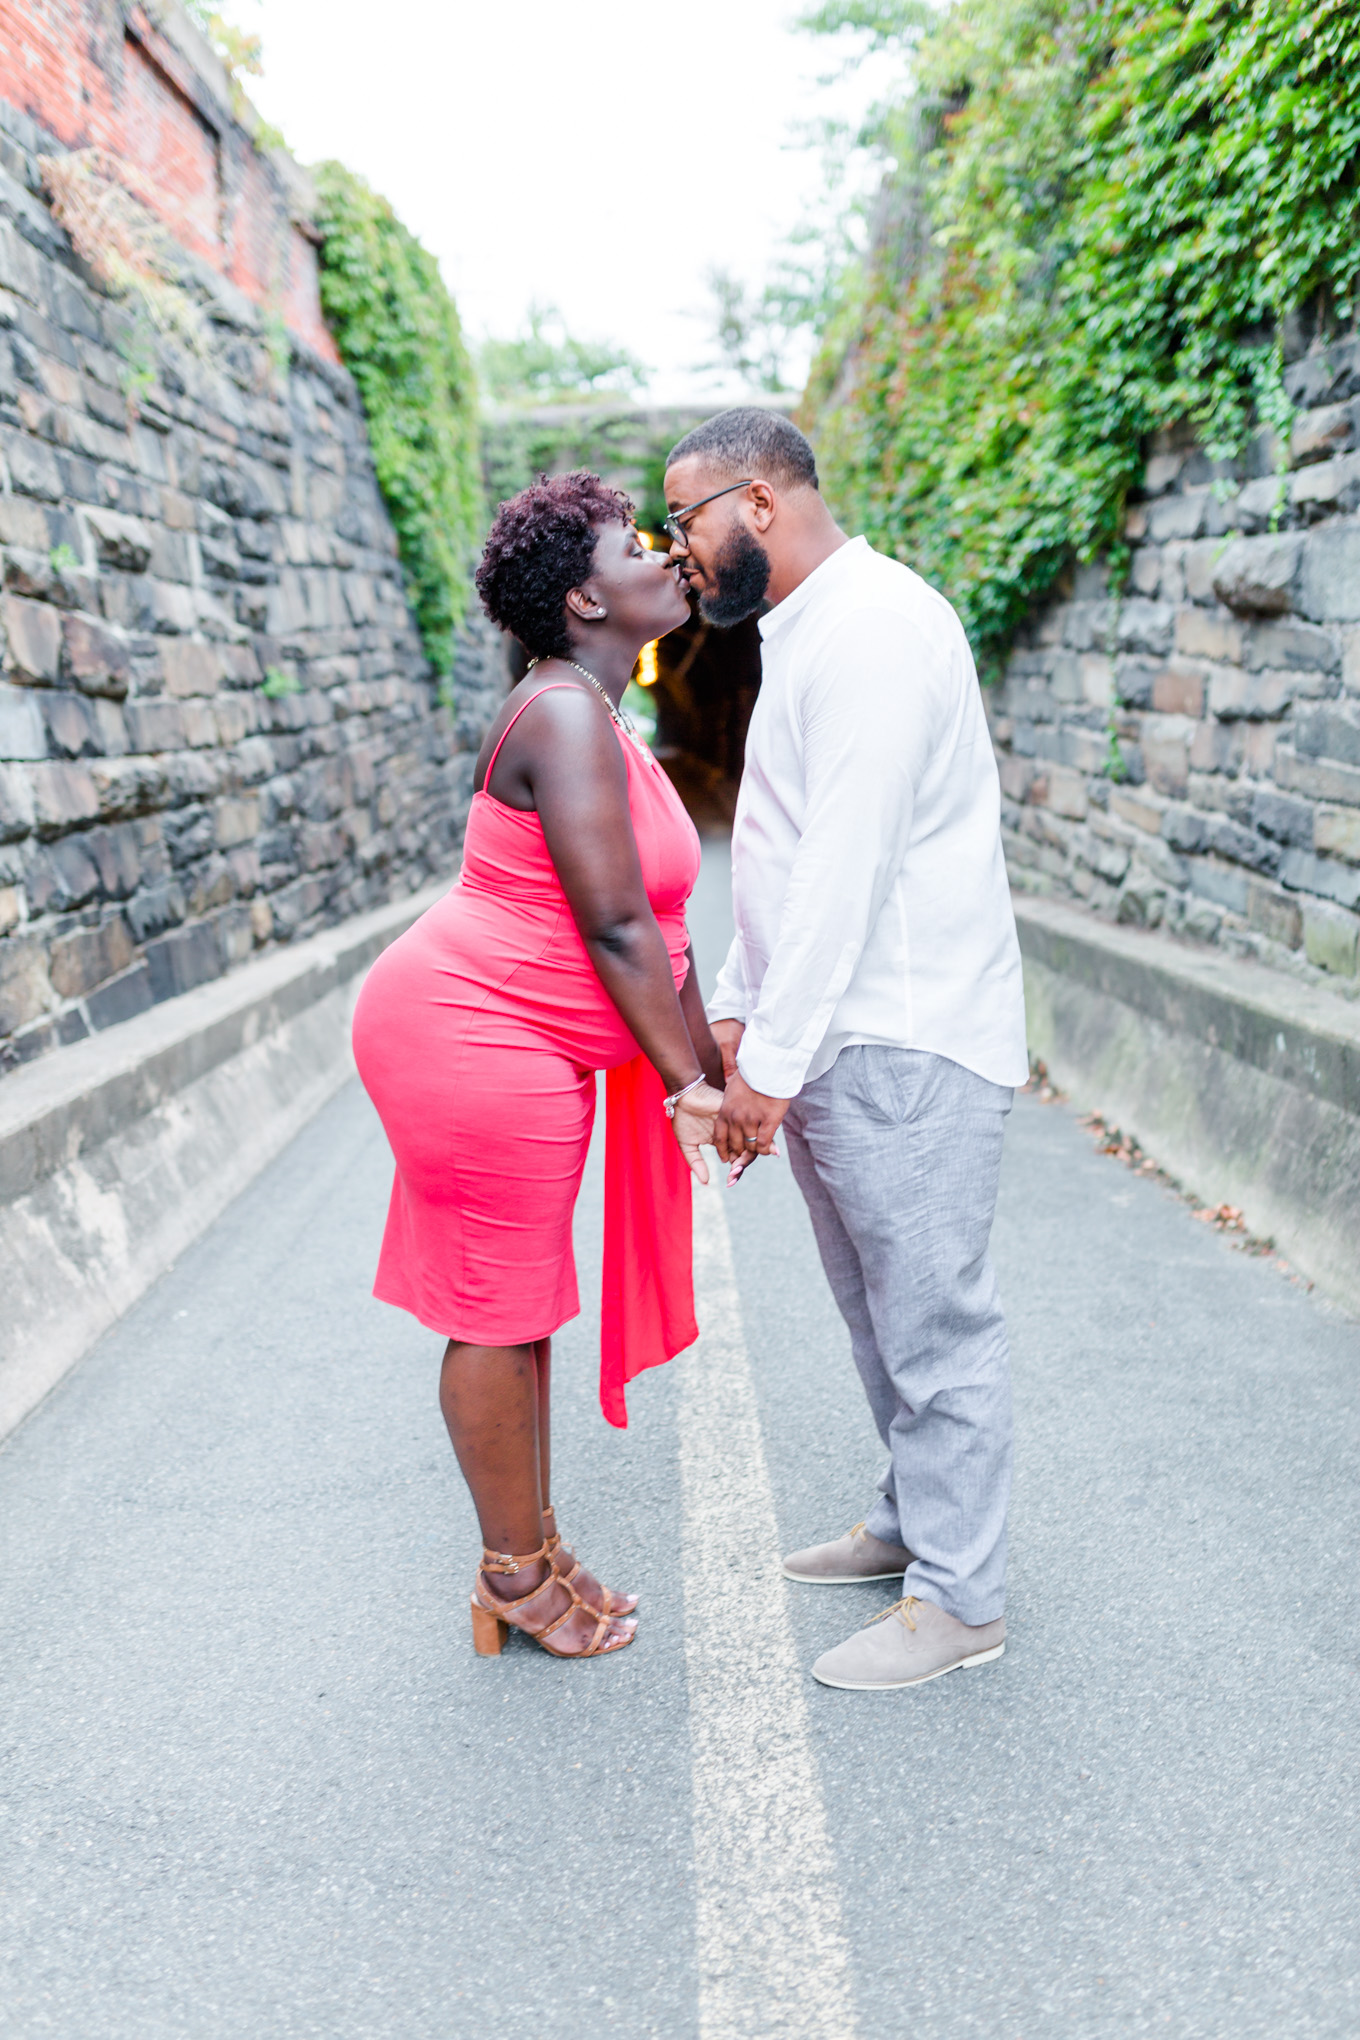 Wilkes Street Tunnel maternity photos, maternity style, coral dress, married couple, mom to be, dad to be, old town Alexandria, northern Virginia, maternity photographer, Alexandria maternity photographer, magic hour portraits, kissing couple